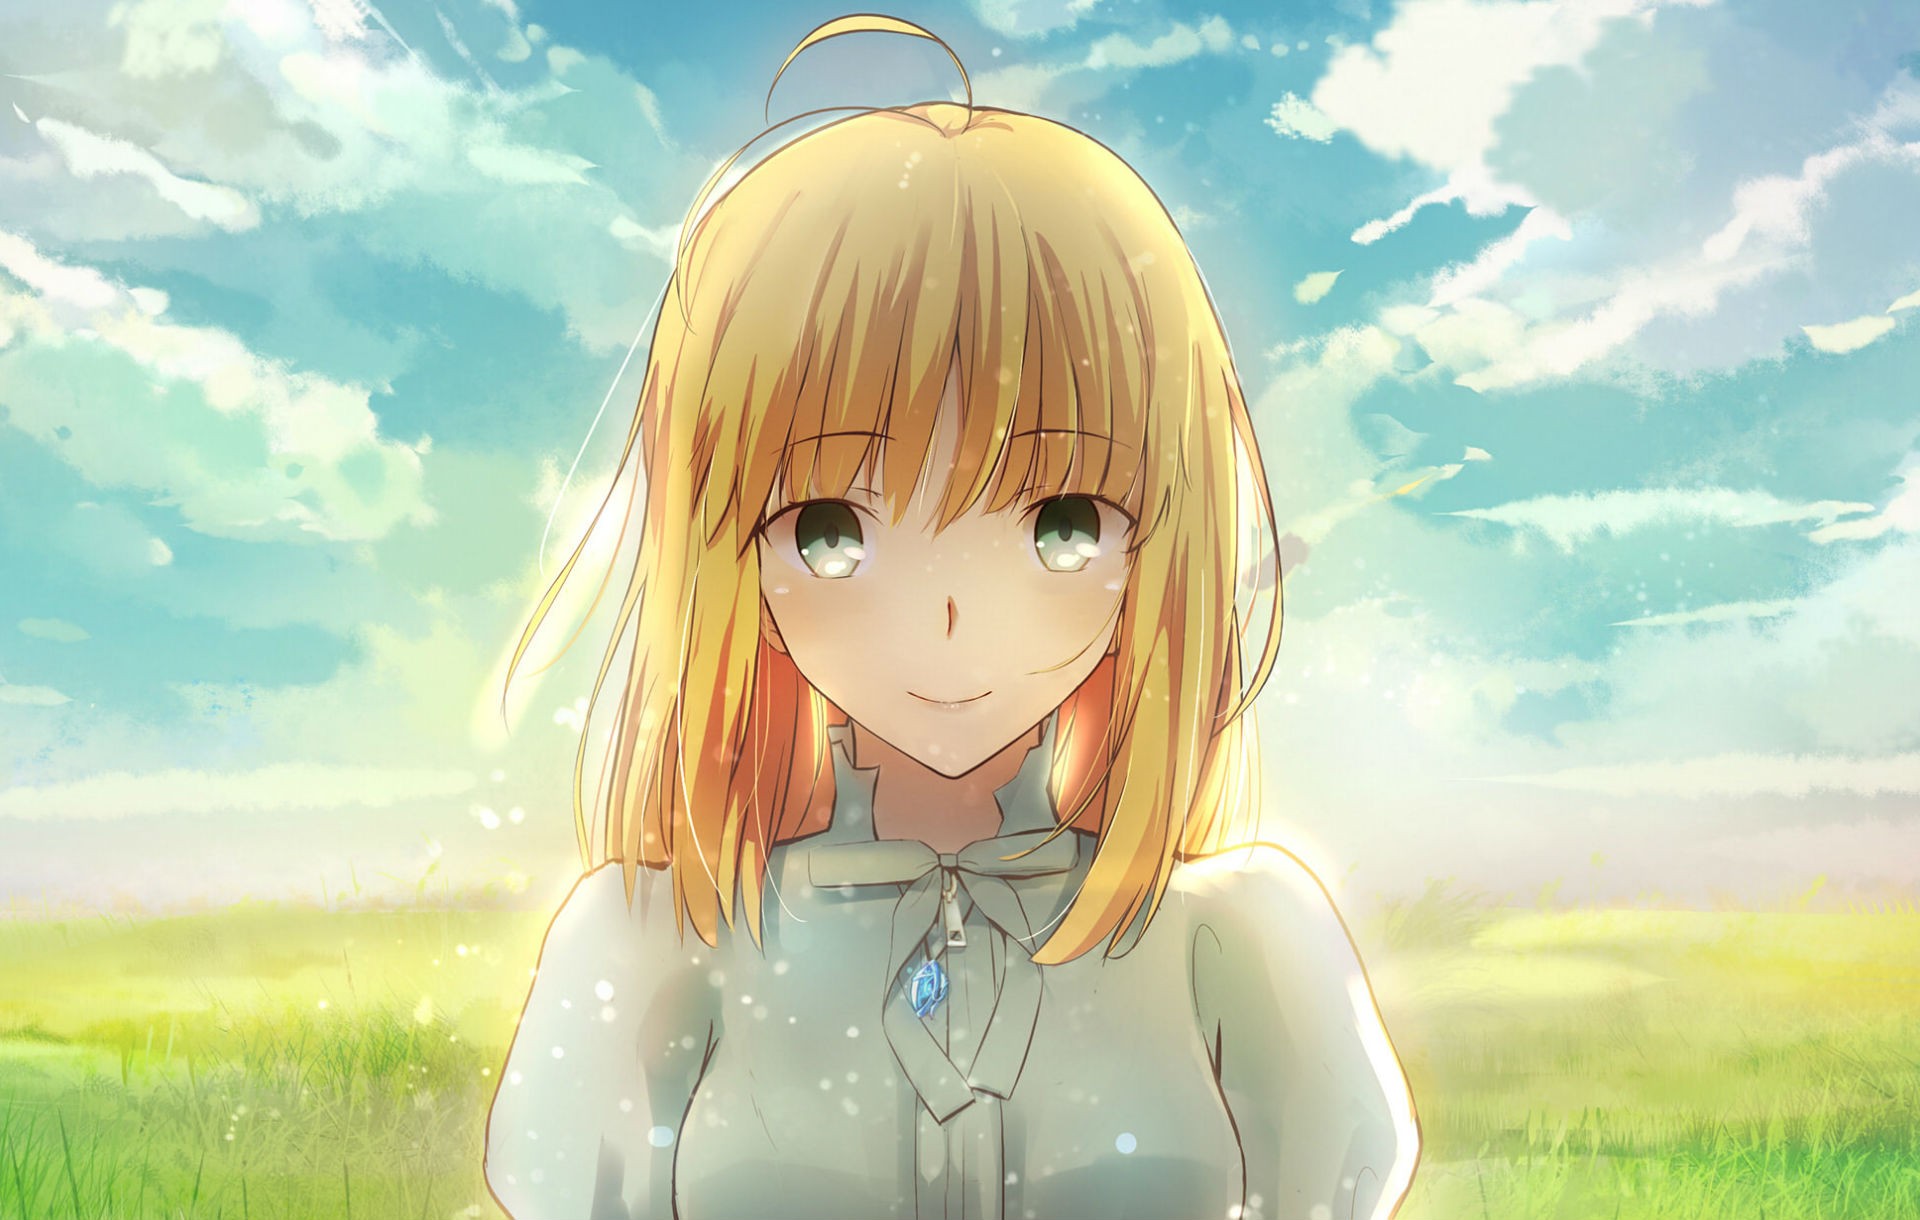 Saber Fate Series Blonde Alternate Outfit Short Hair Gray Eyes Clouds Sky Depth Of Field Anime Girls 1920x1220